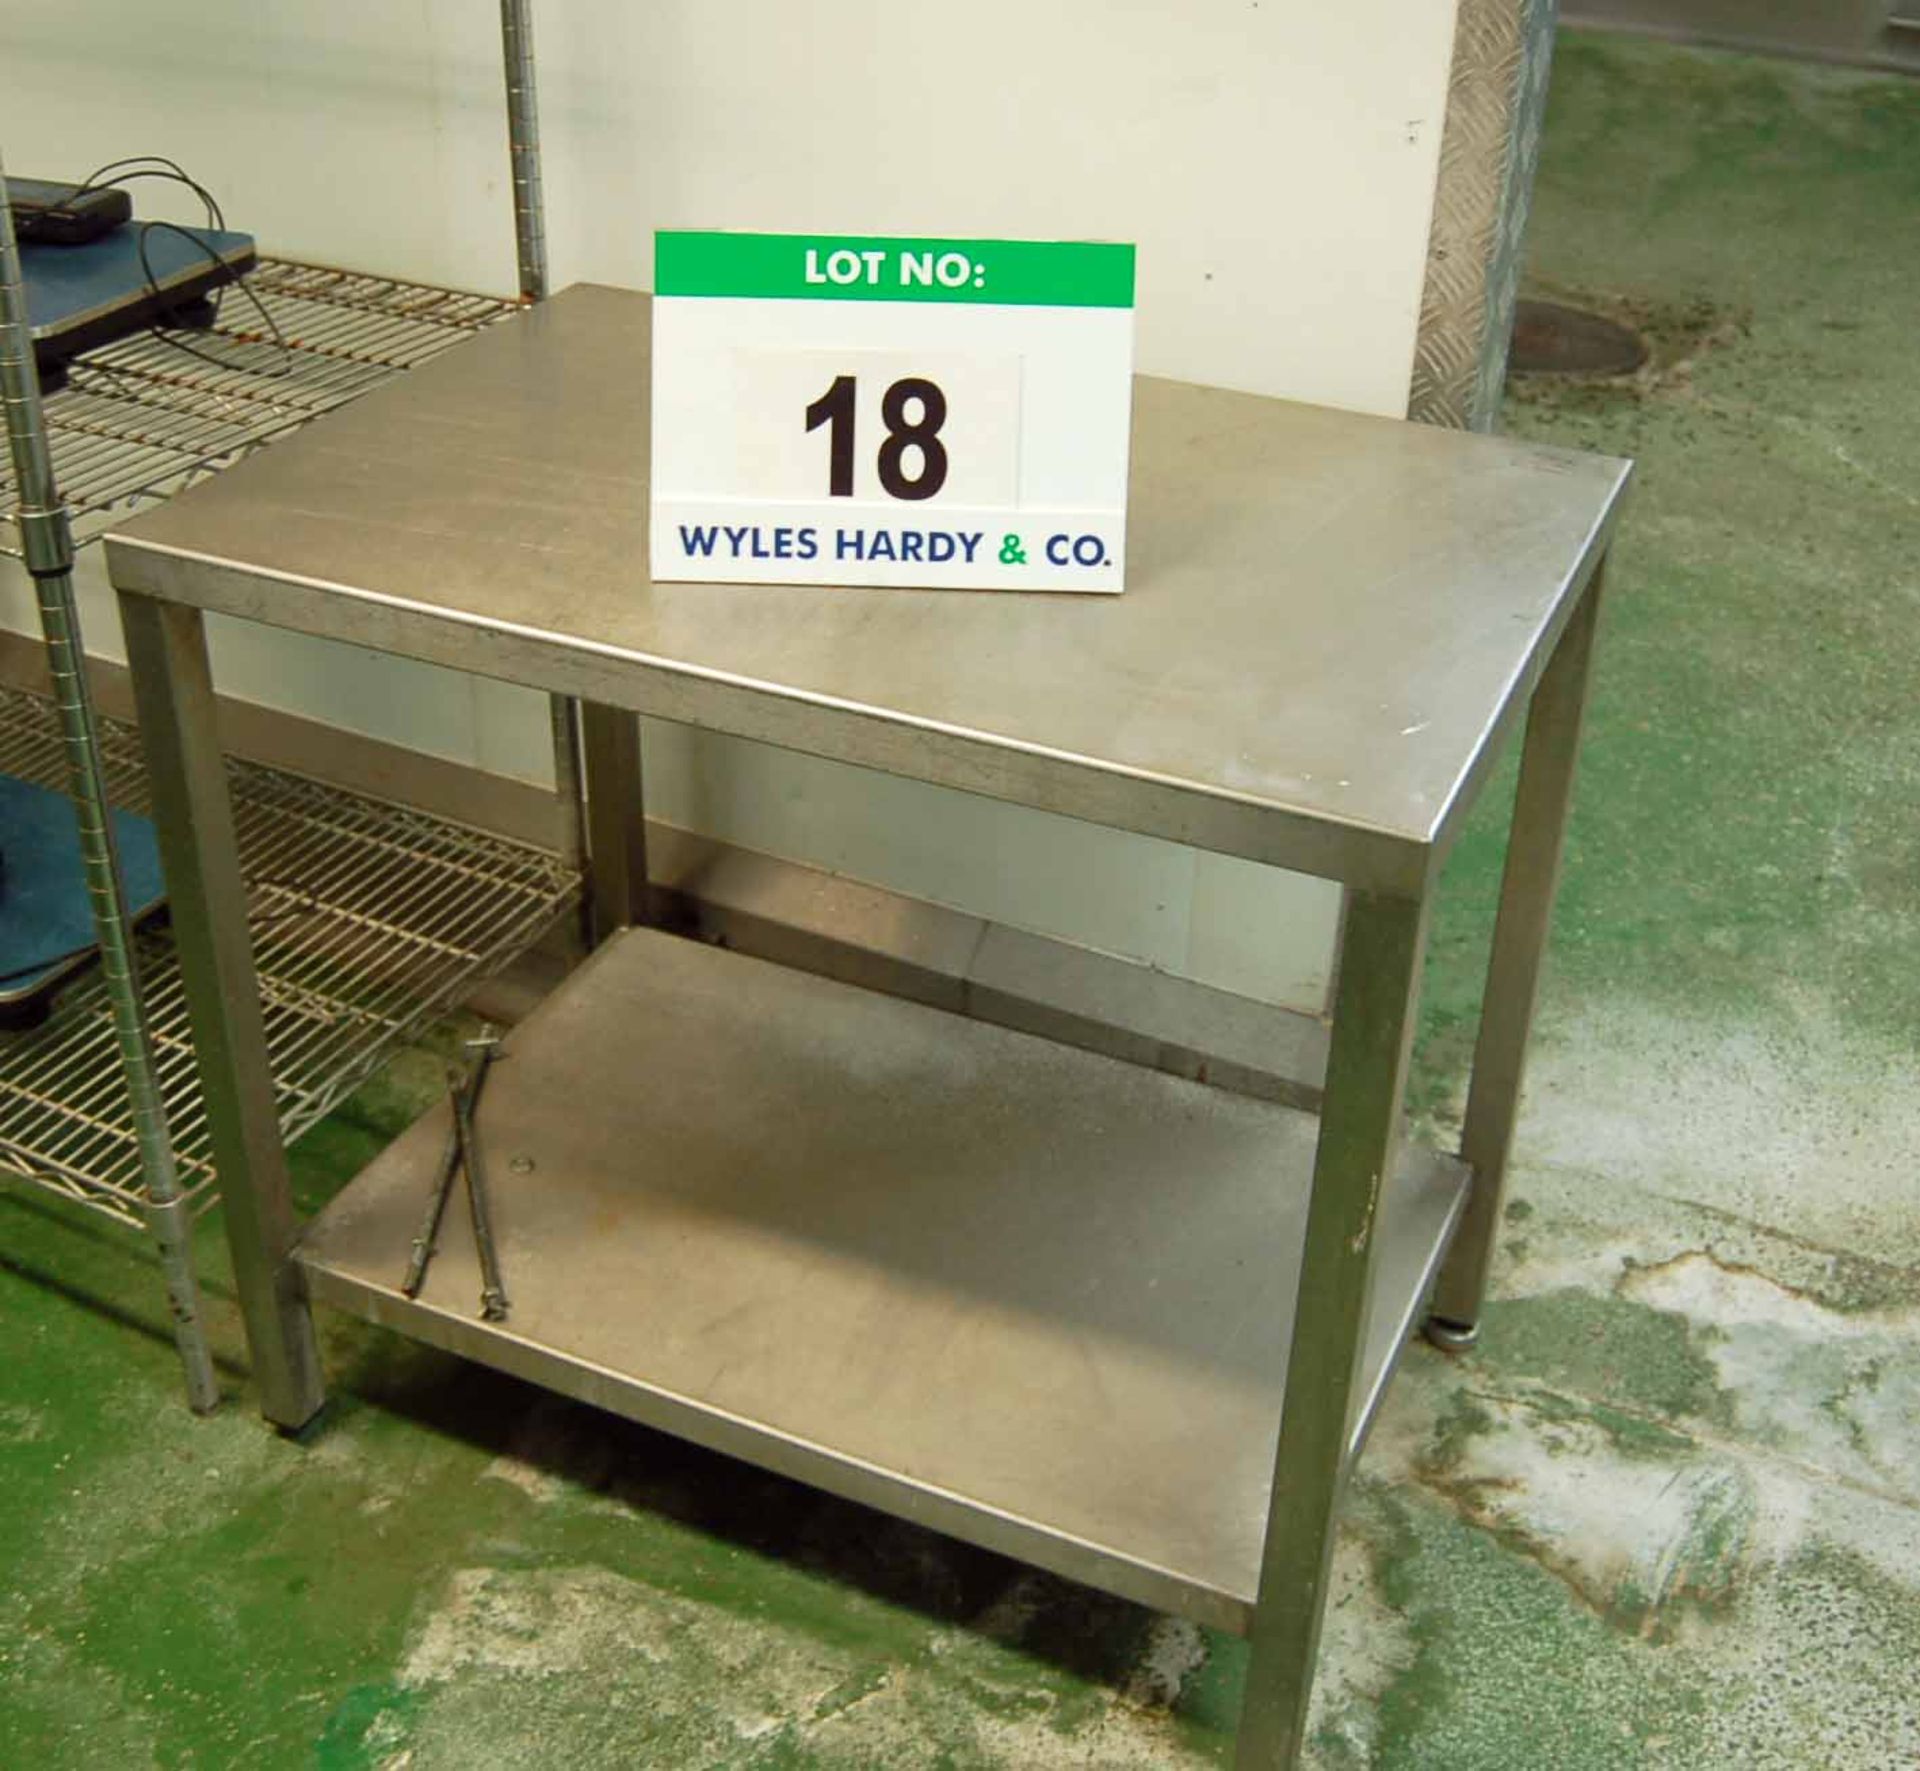 An Approx. 600mm x 900mm x 840mm Height Stainless Steel 2-Tier Food Preparation Table